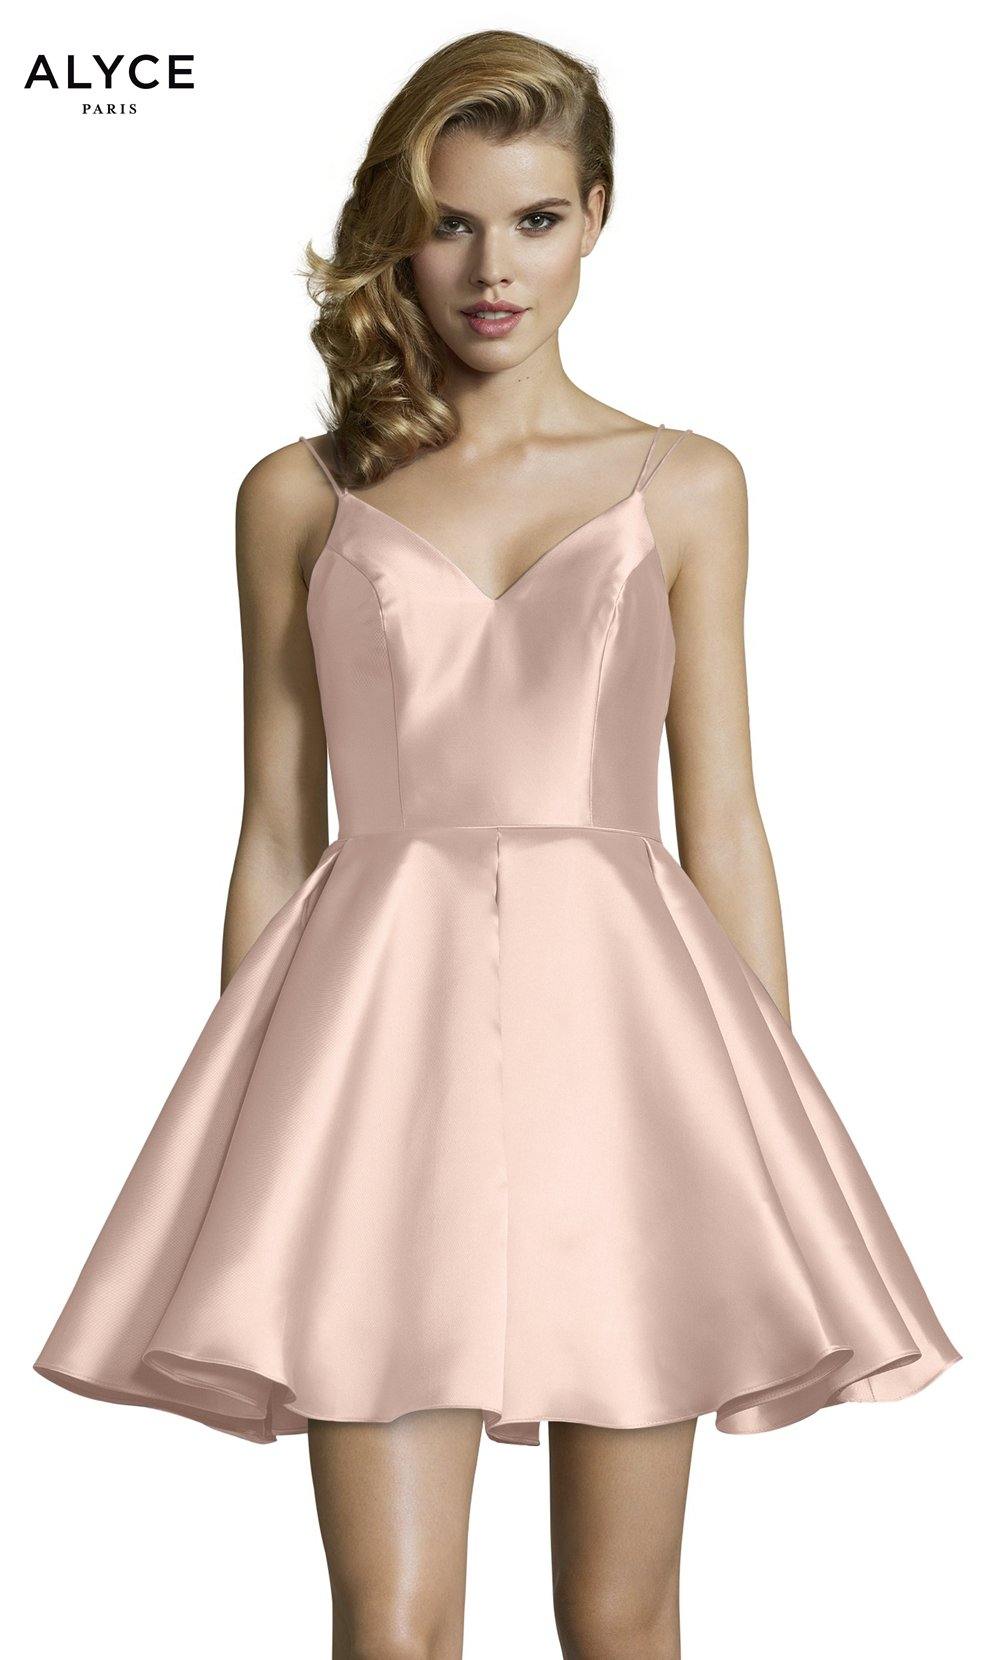 Short french pink party dress with a v neckline, pockets, and a mikado fabrication. SWATCH_3764__FRENCH-PINK